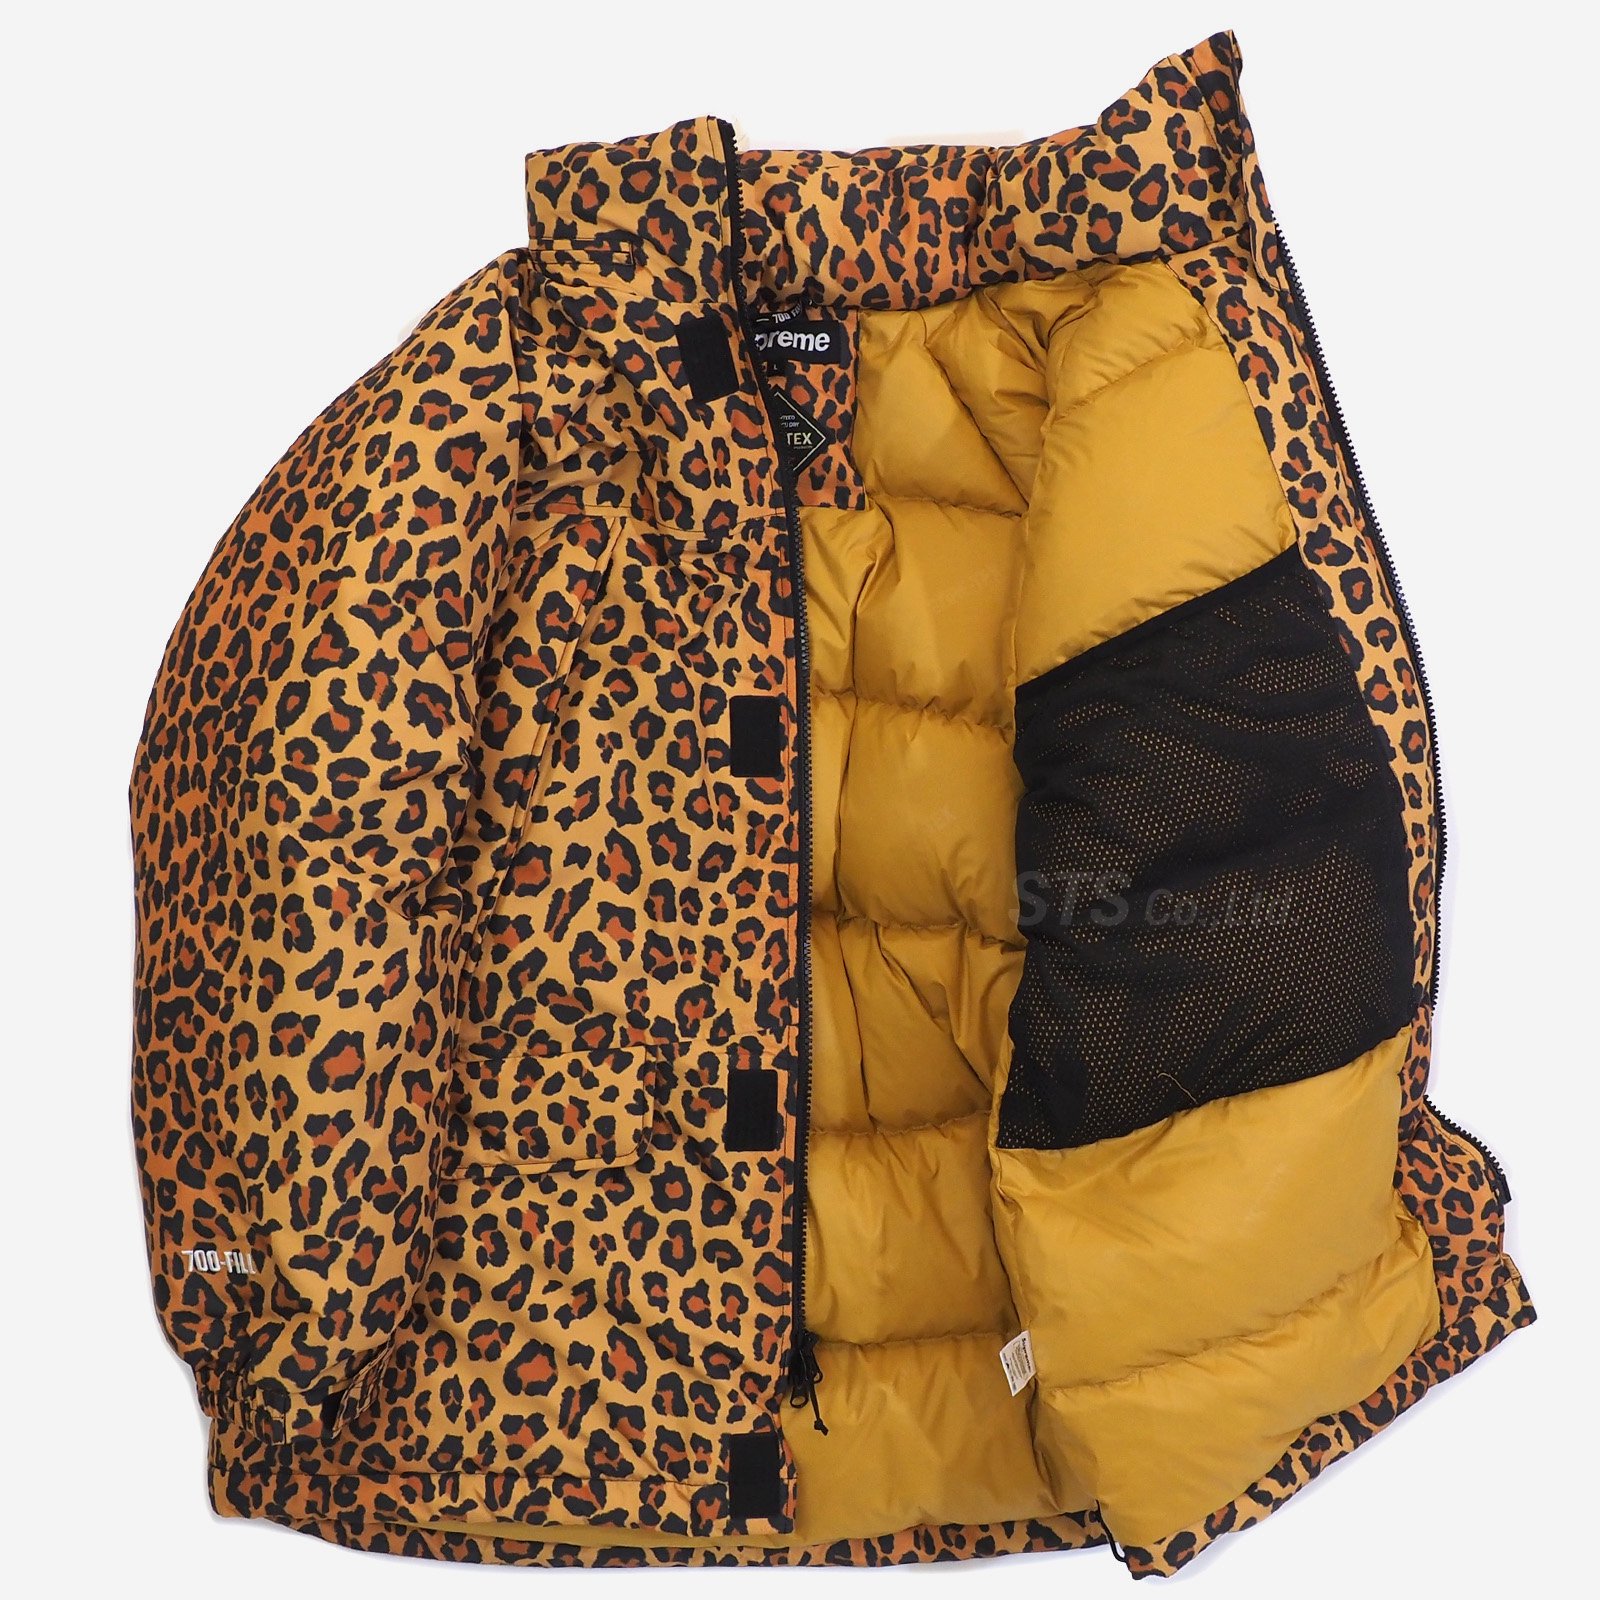 Supreme GORE-TEX 700-Fill Down Parka 豹柄 | www.innoveering.net